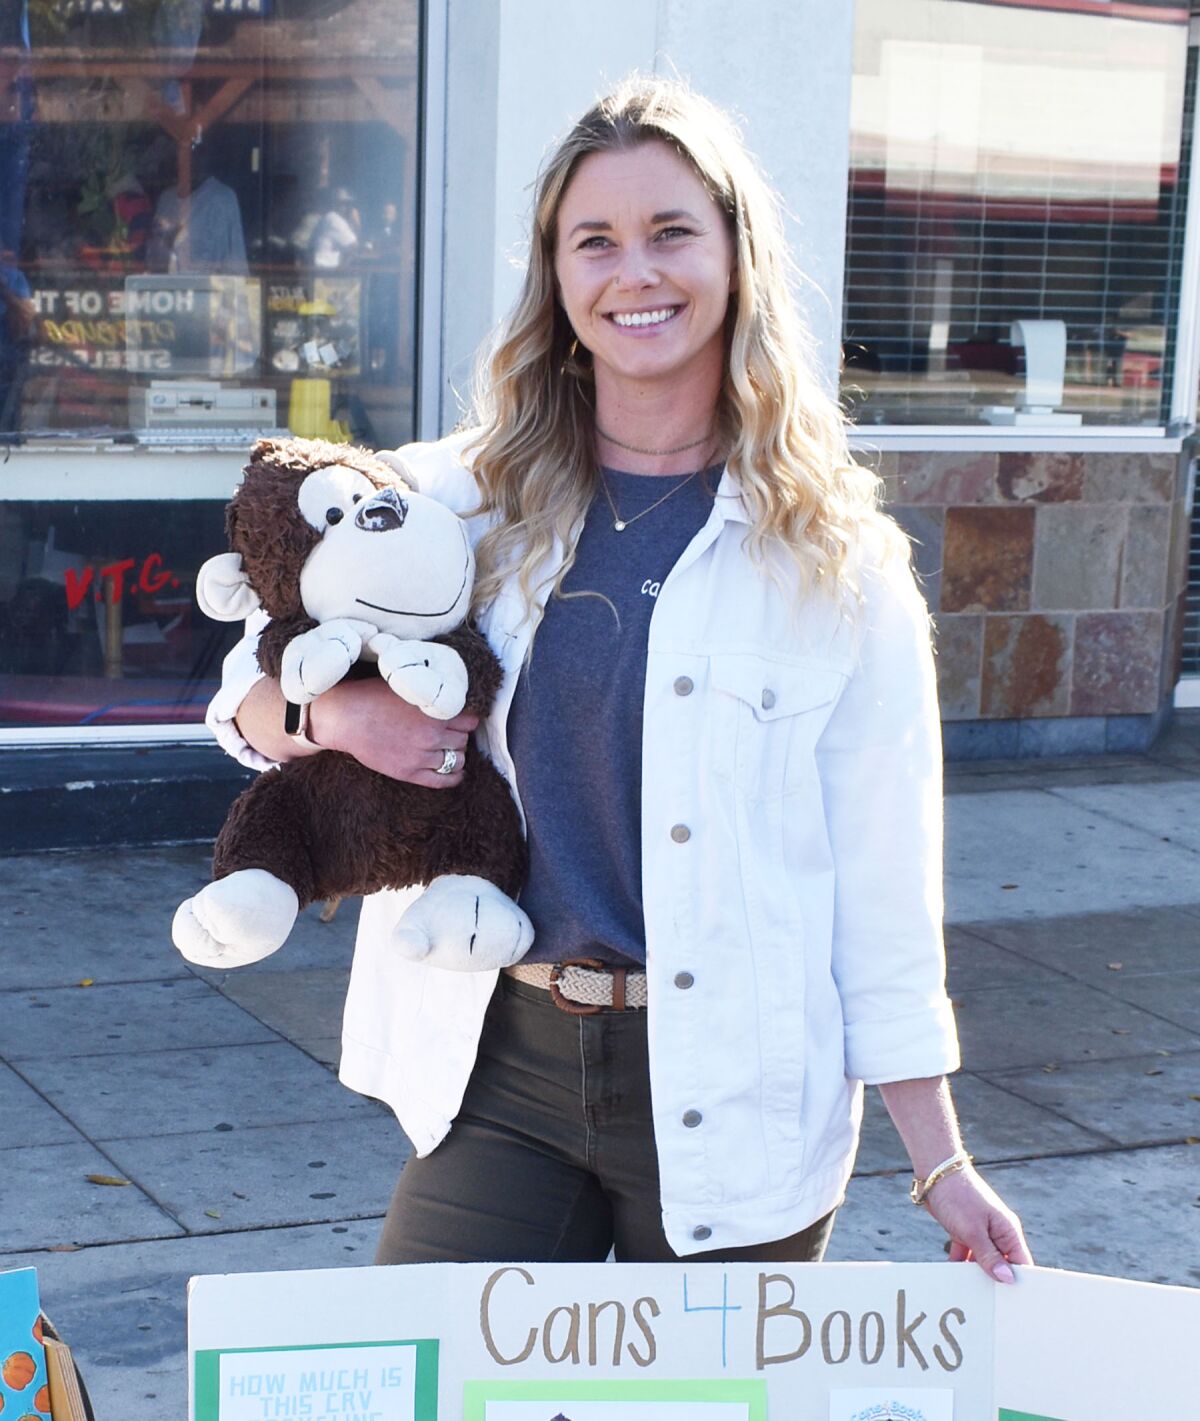 Pacific Beach resident Trisha Goolsby holding stuffed monkey Rupert, one of the Cans4Books mascots.